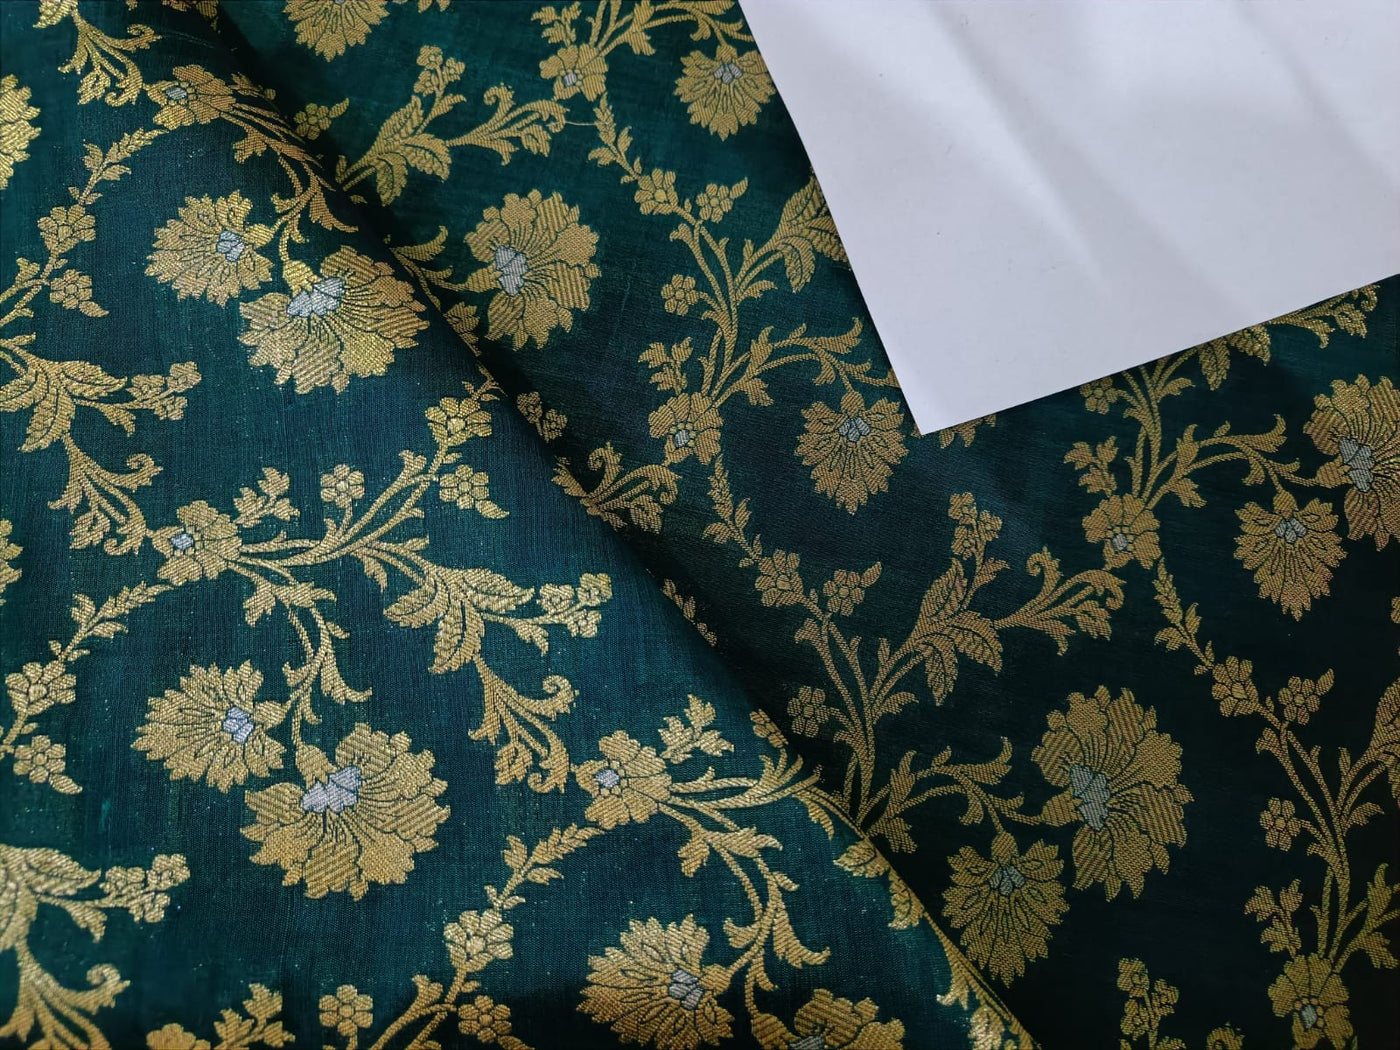 Silk Brocade fabric available in 2 colors navy and green 44" WIDE BRO899[4/5]